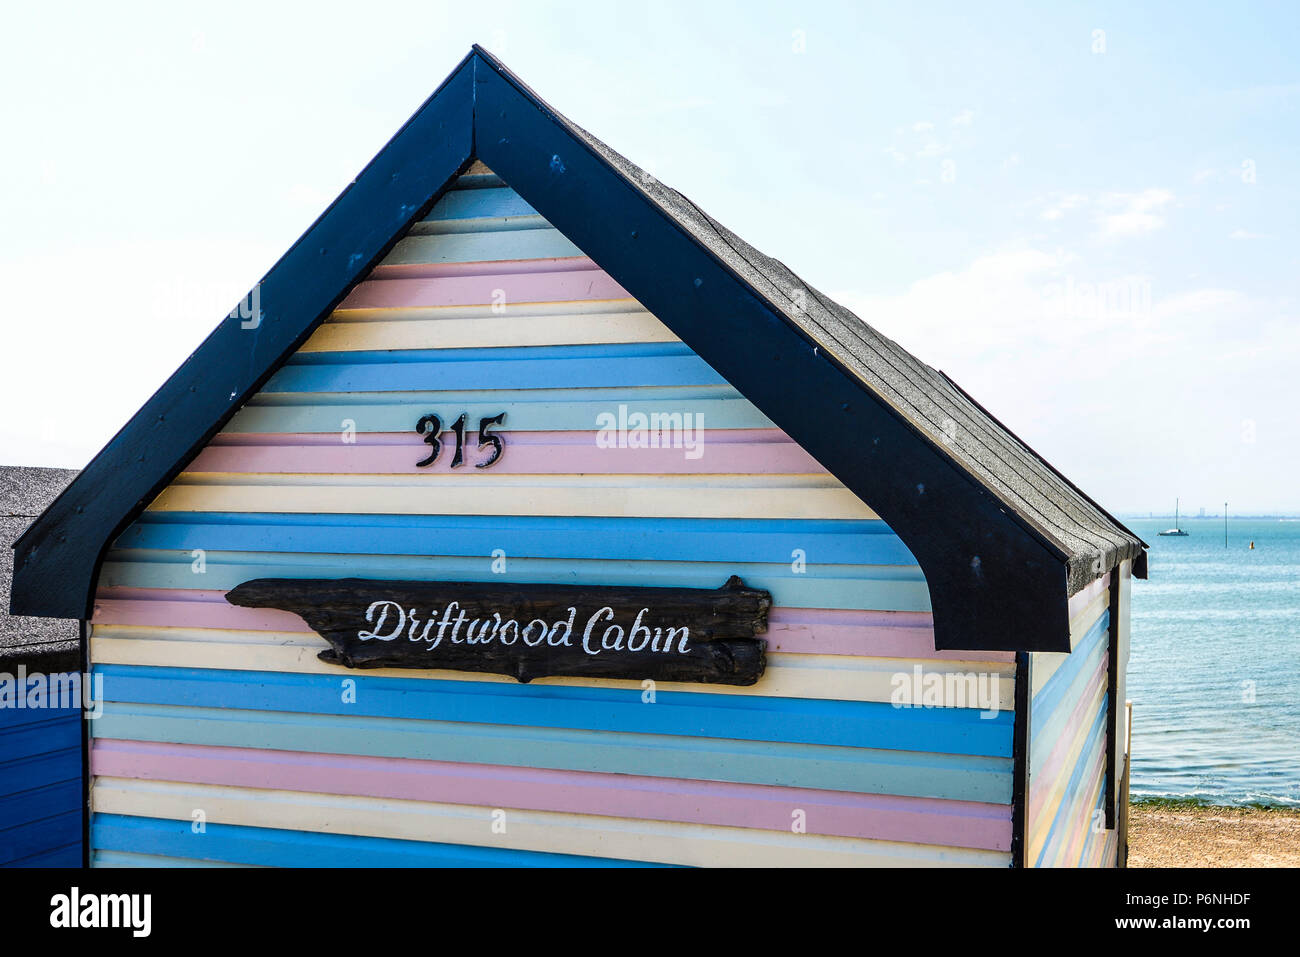 Driftwood Cabin. Multi coloured colourful stripey beach hut at Thorpe Bay, Southend on Sea, Essex, UK. Painted wood beach hut. Pastel colours Stock Photo